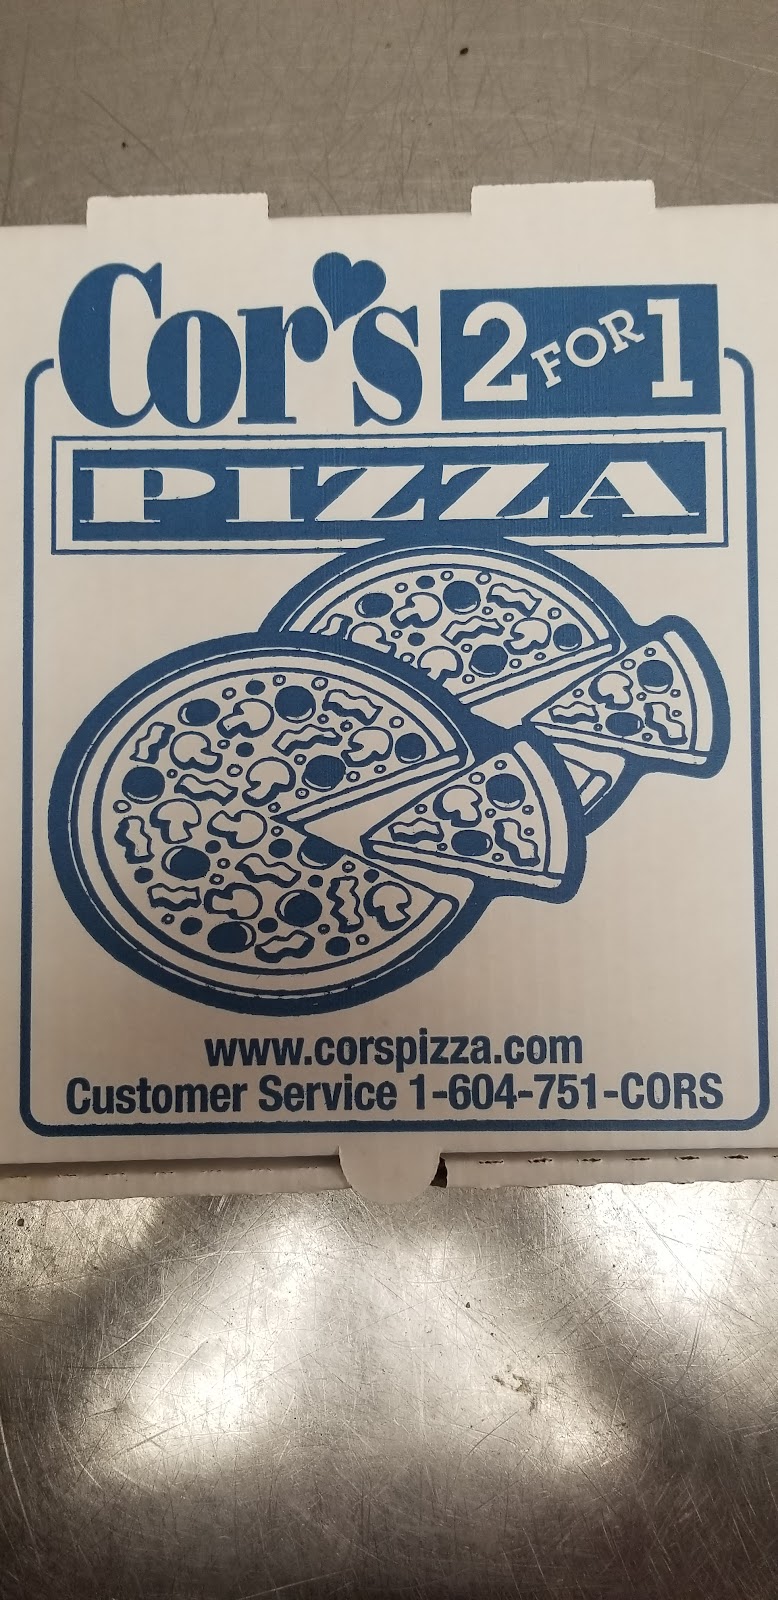 Cors 2 for 1 pizza | 27256 Fraser Hwy, Aldergrove, BC V4W 3P9, Canada | Phone: (604) 857-2626